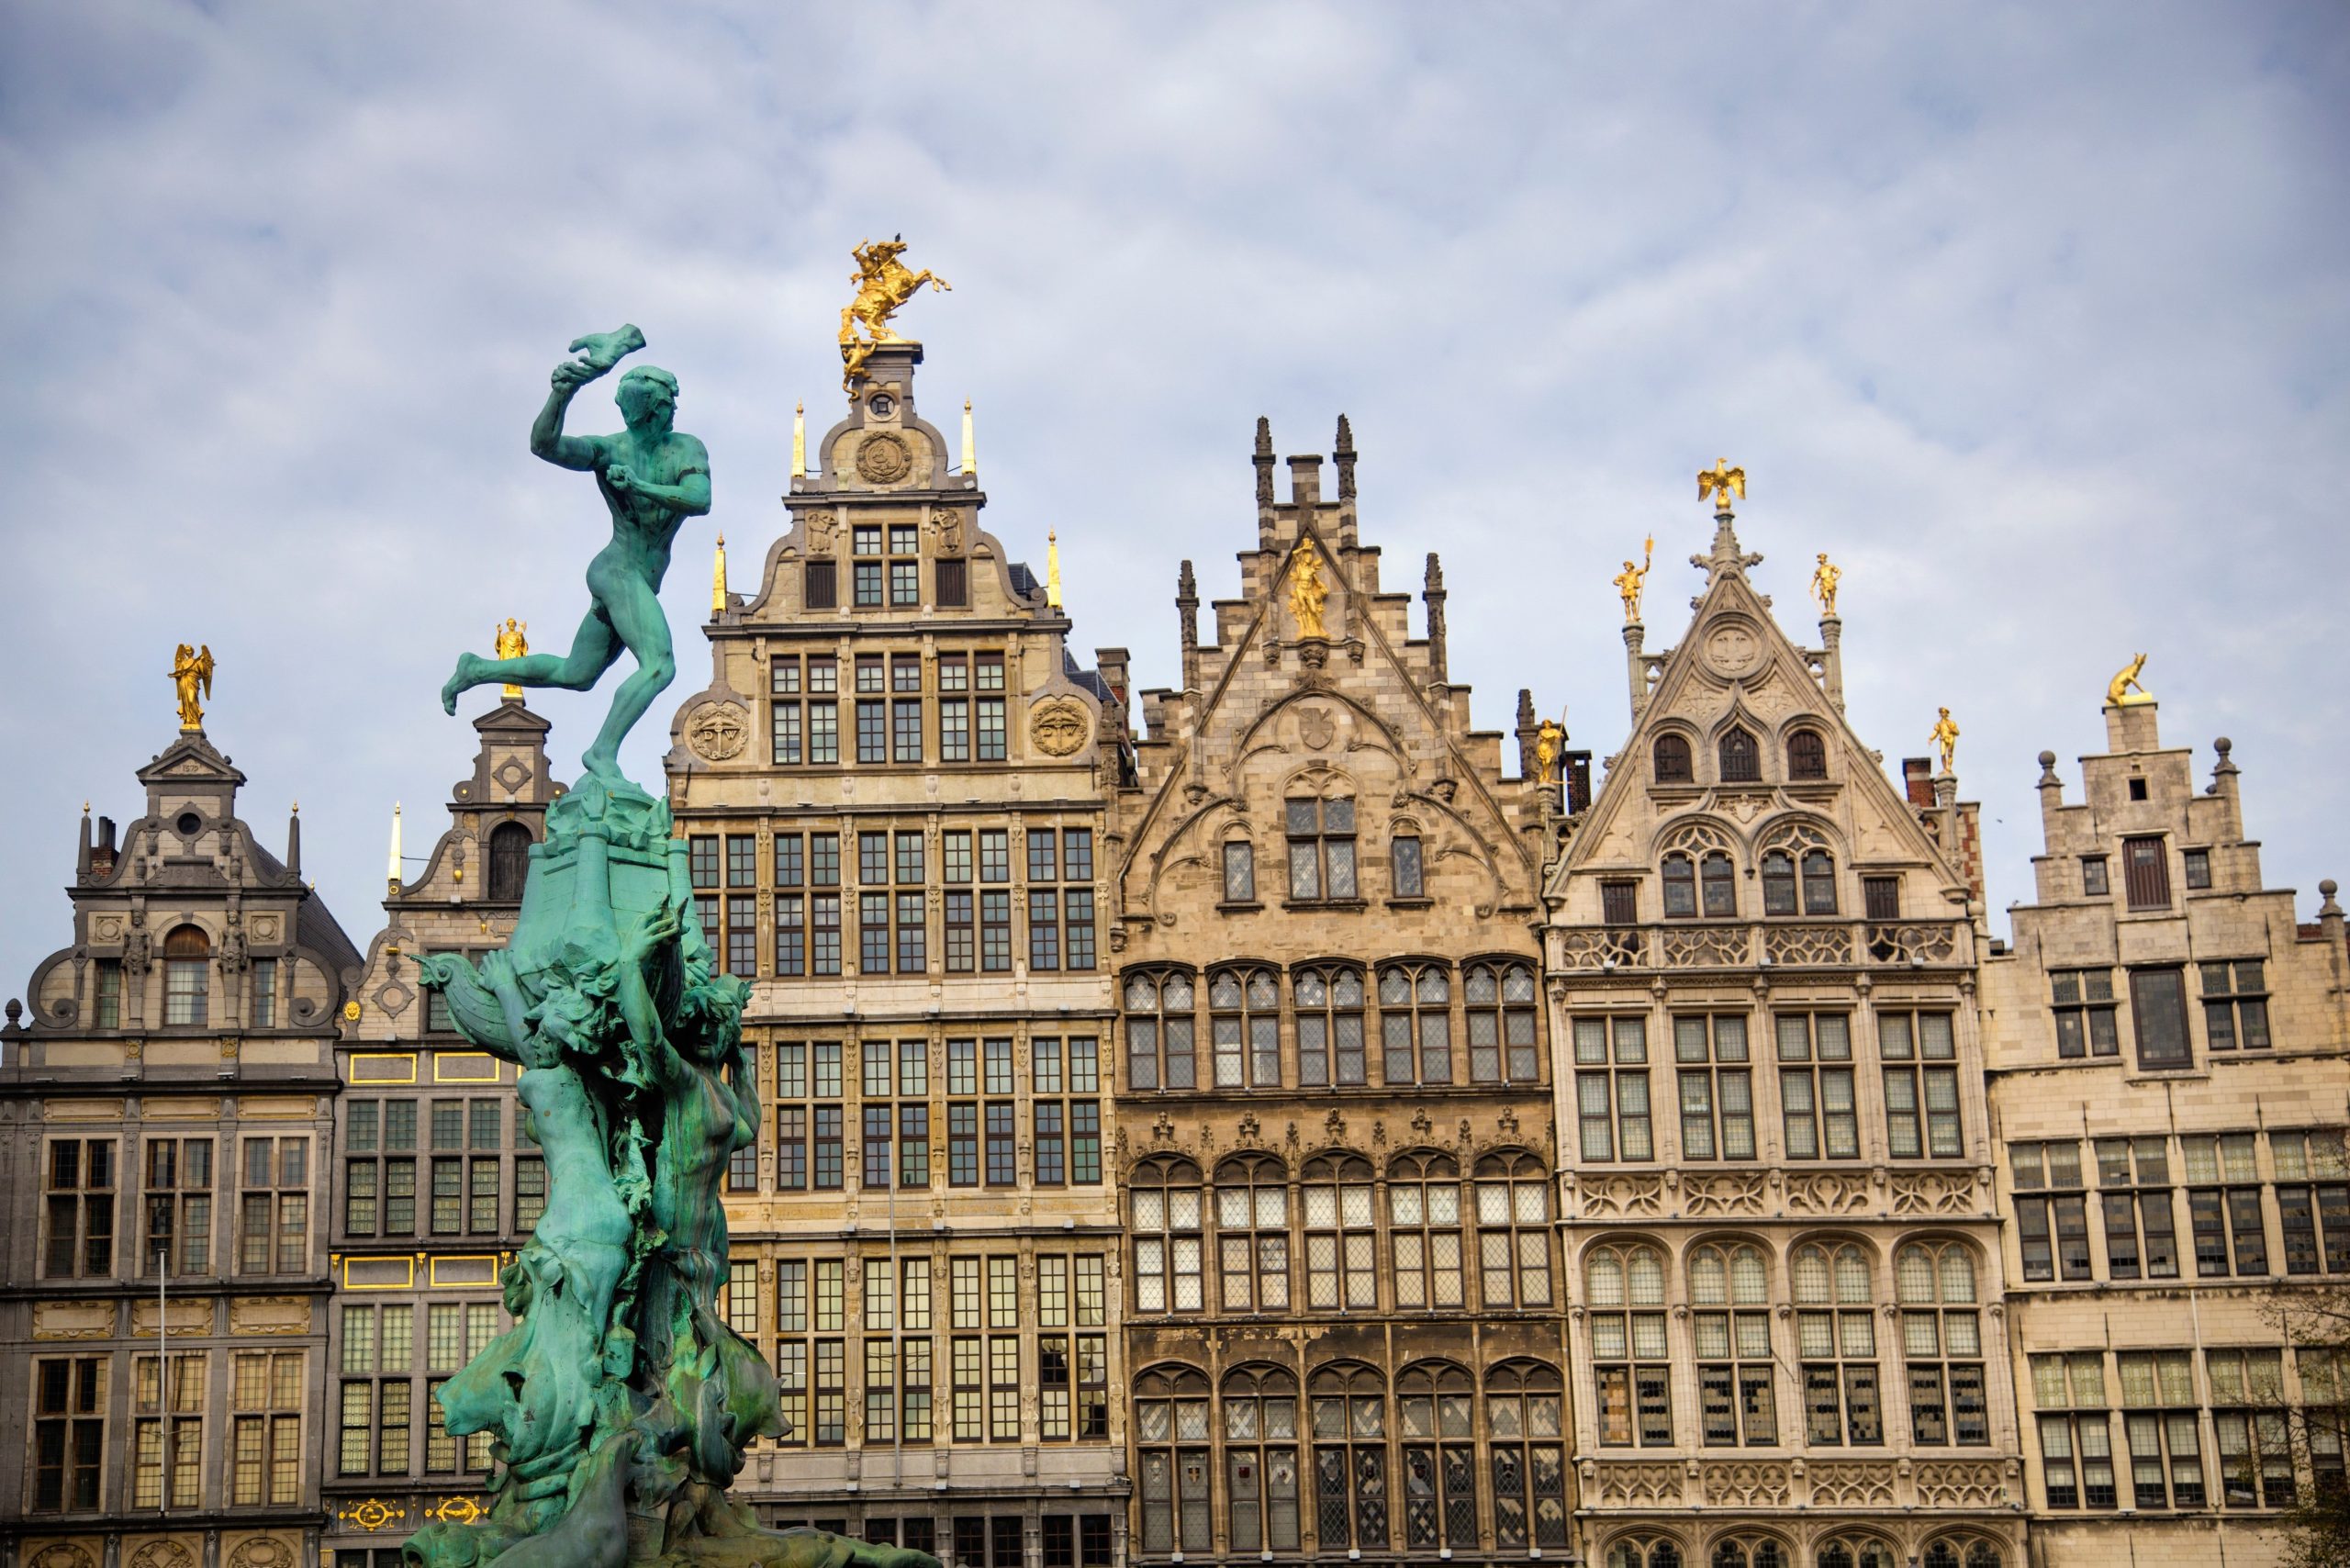 The seventh activity in the 10 best things to do in Belgium is to visit Antwerp